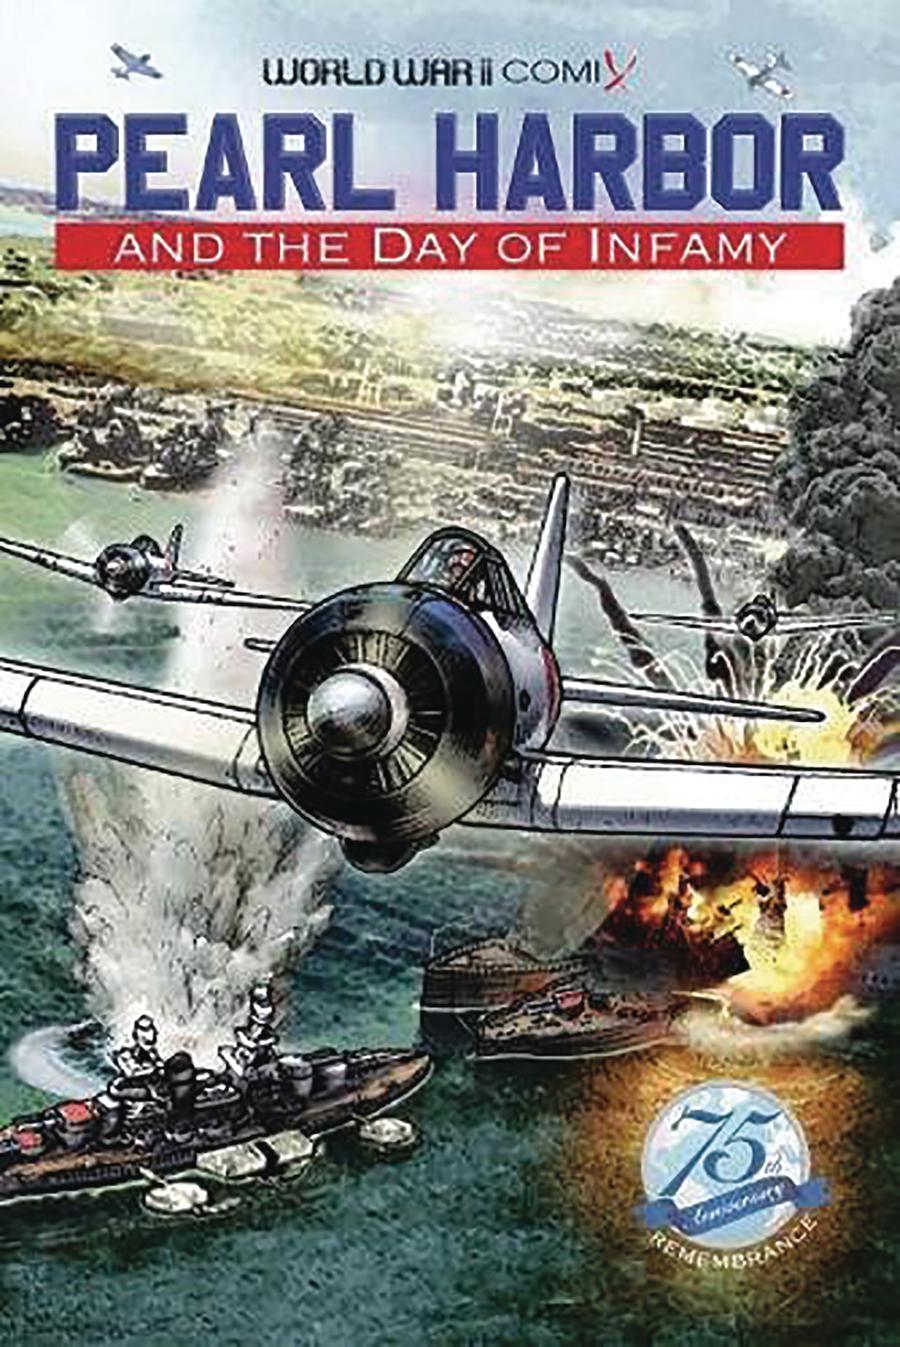 World War II Comix Pearl Harbor And The Day Of Infamy